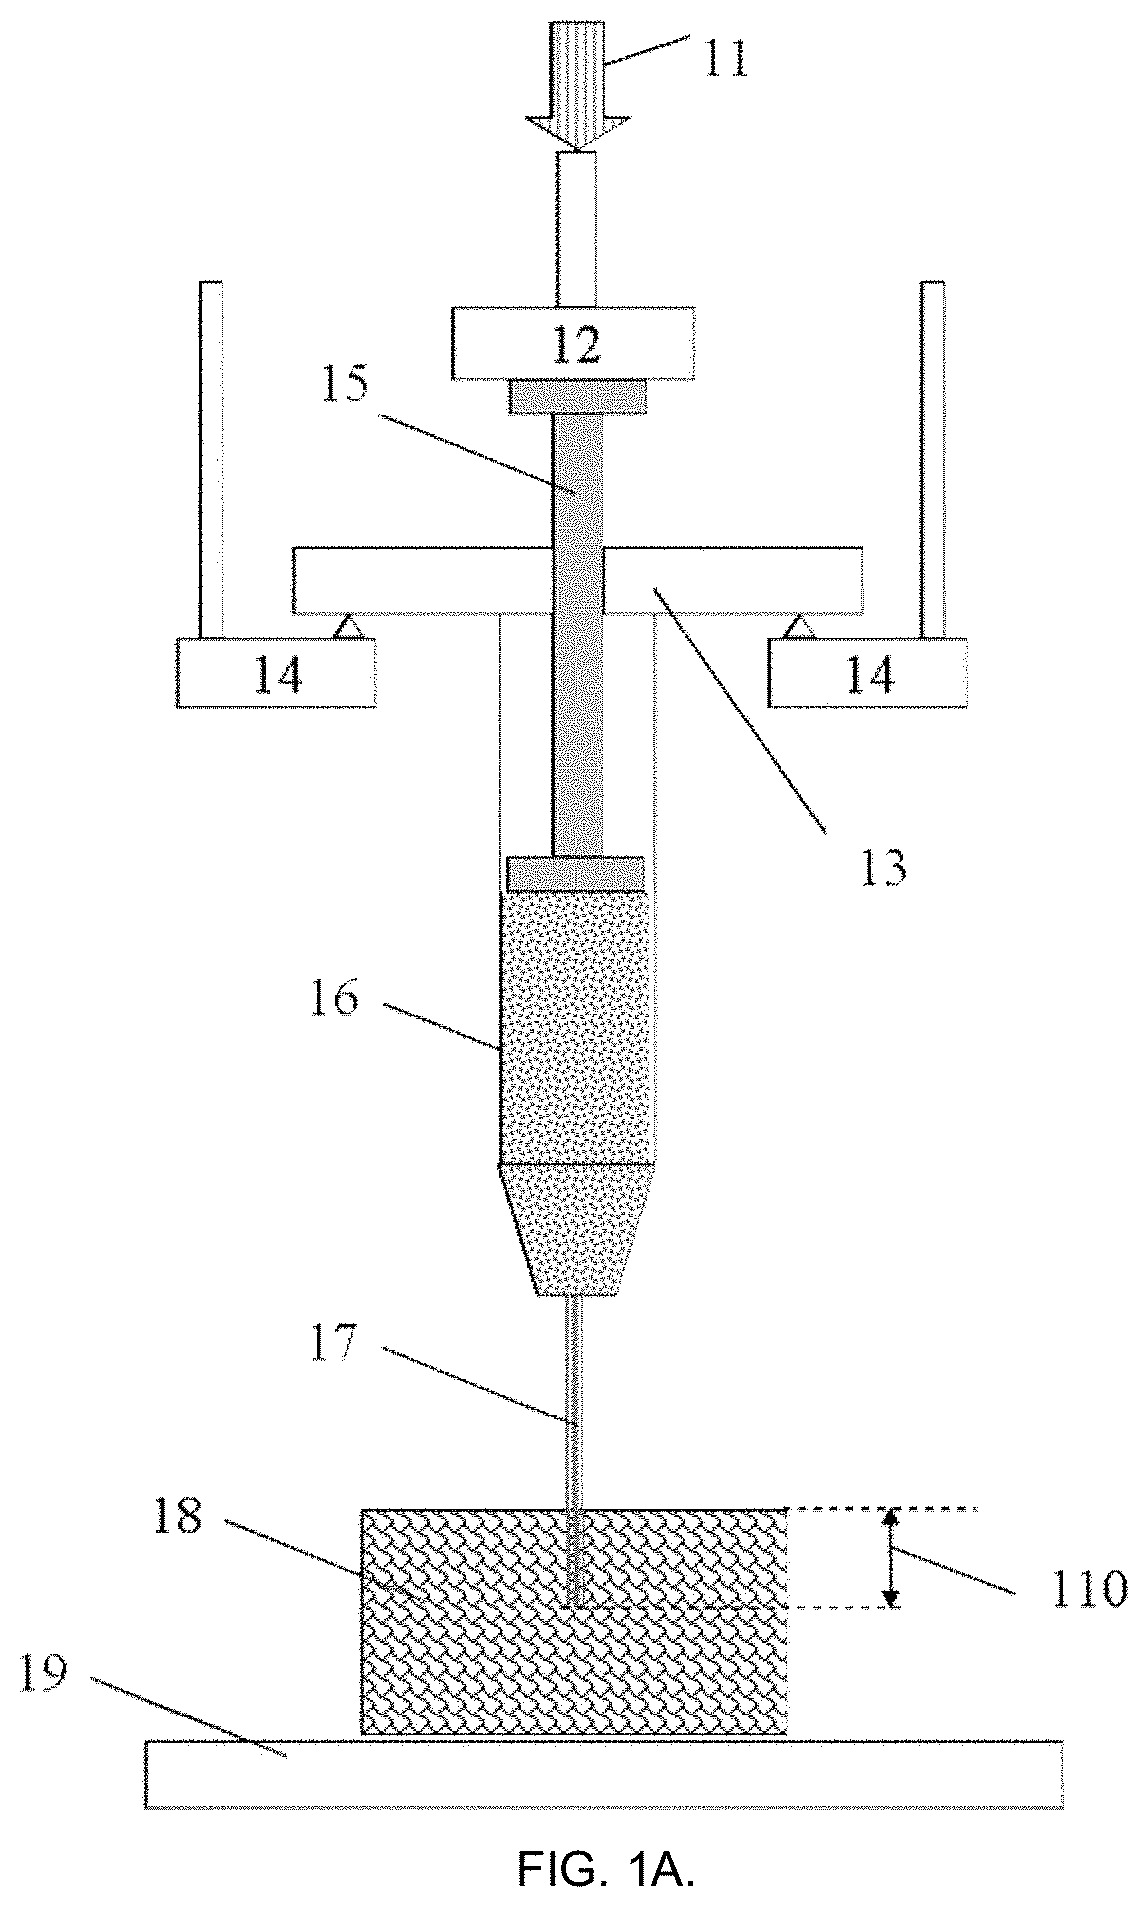 Method for measurement and model-free evaluation of injectable biomaterials properties